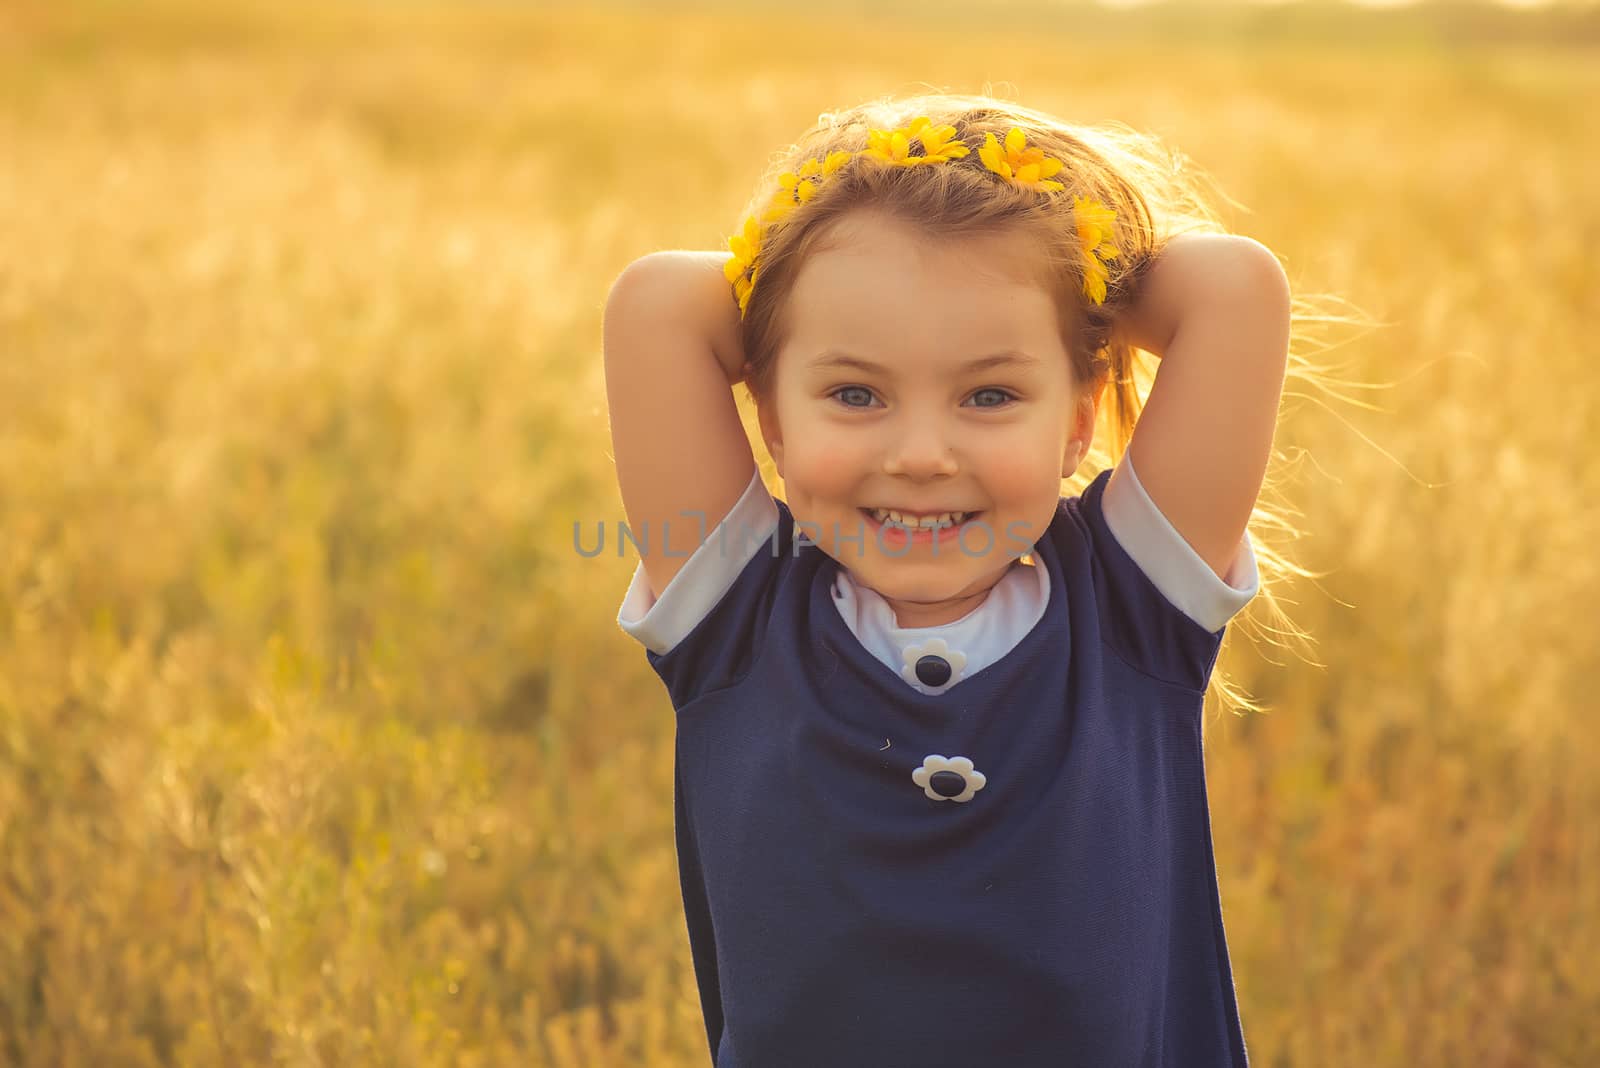 the beautiful little girl in a blue dress against a field laughs, holds hands behind the head